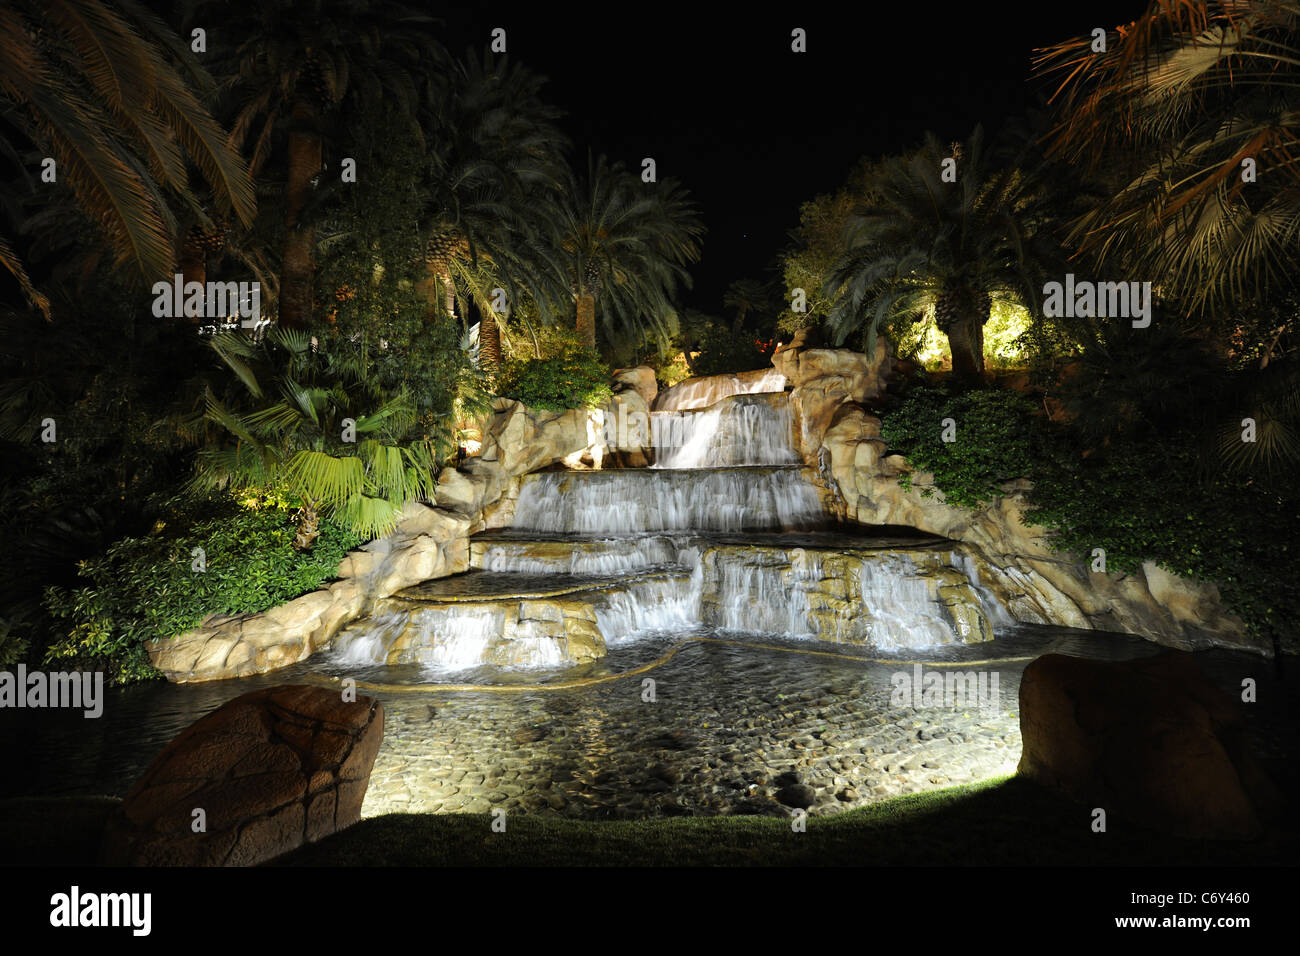 Falls and fountains. A night kind on falls and fountains. Night illumination. Stock Photo